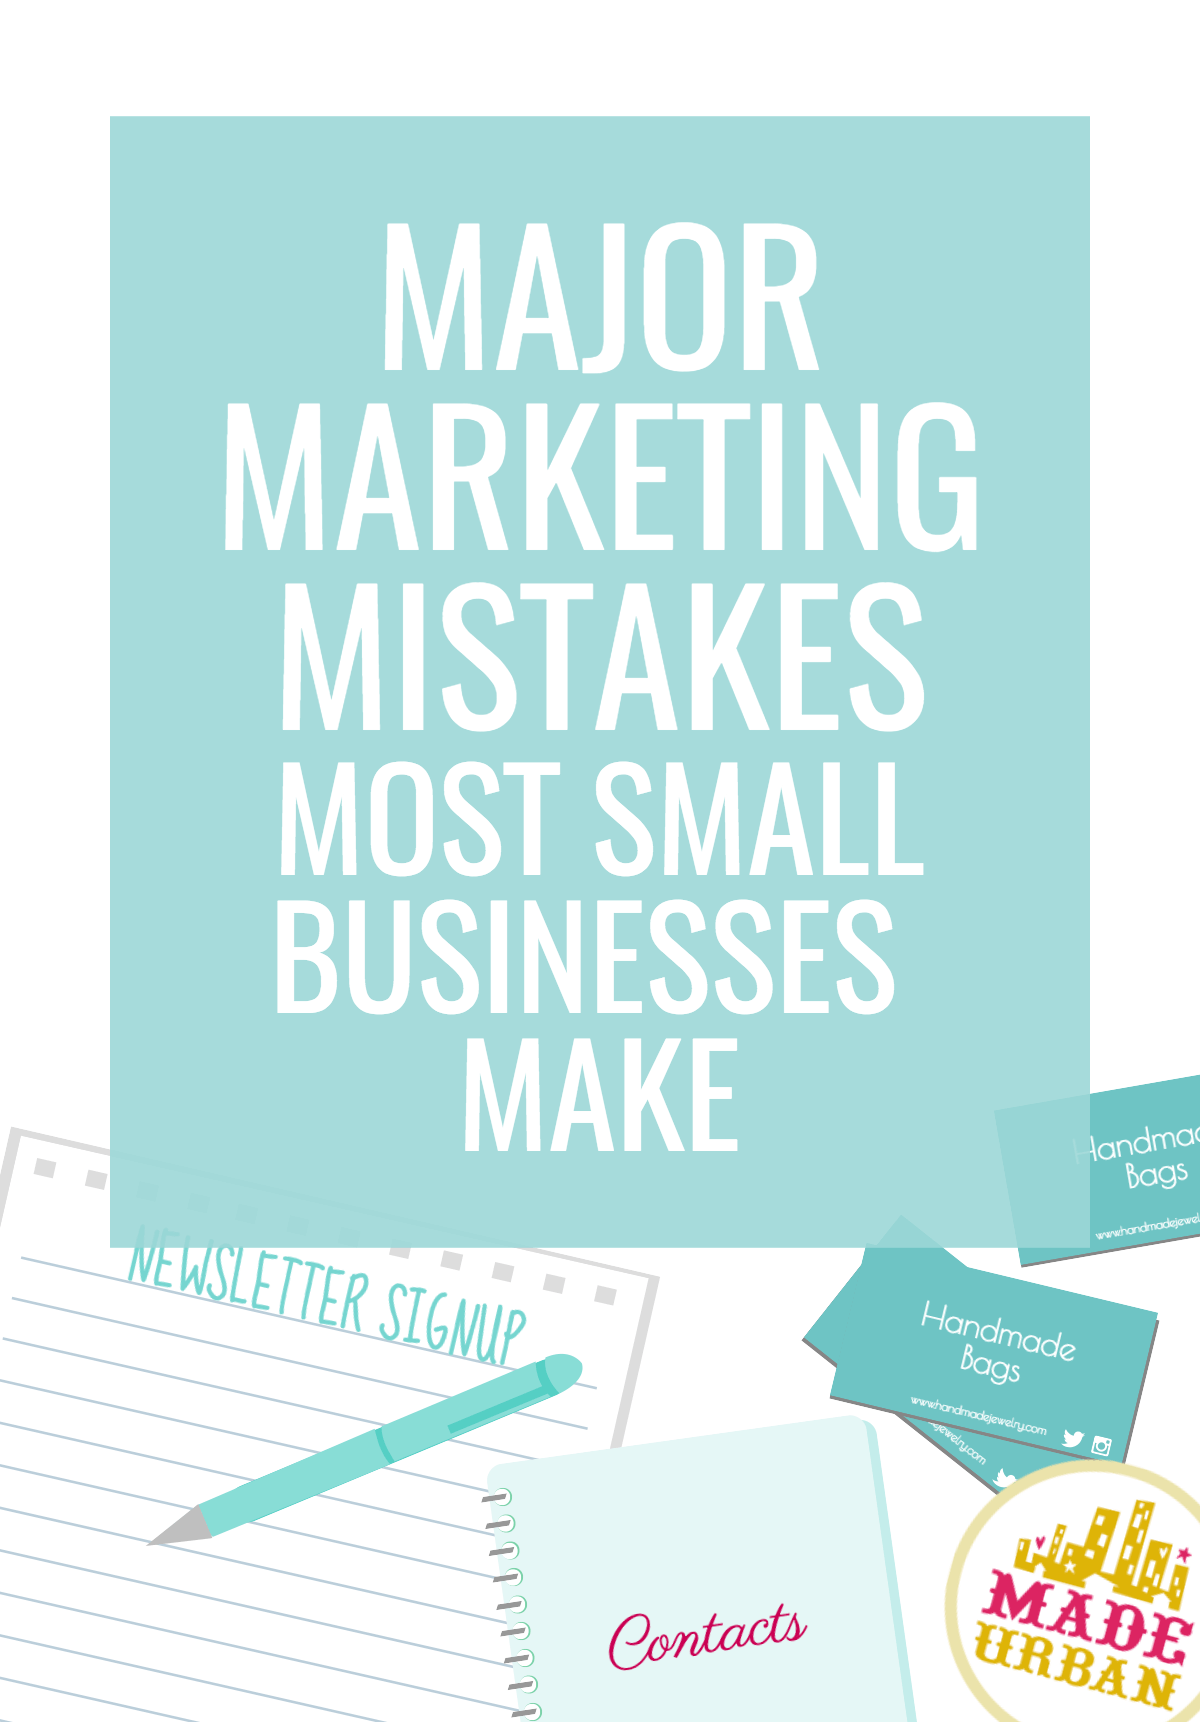 Marketing is essential to small handmade business success but many owners make these common mistakes that stop their customers and sales from growing.